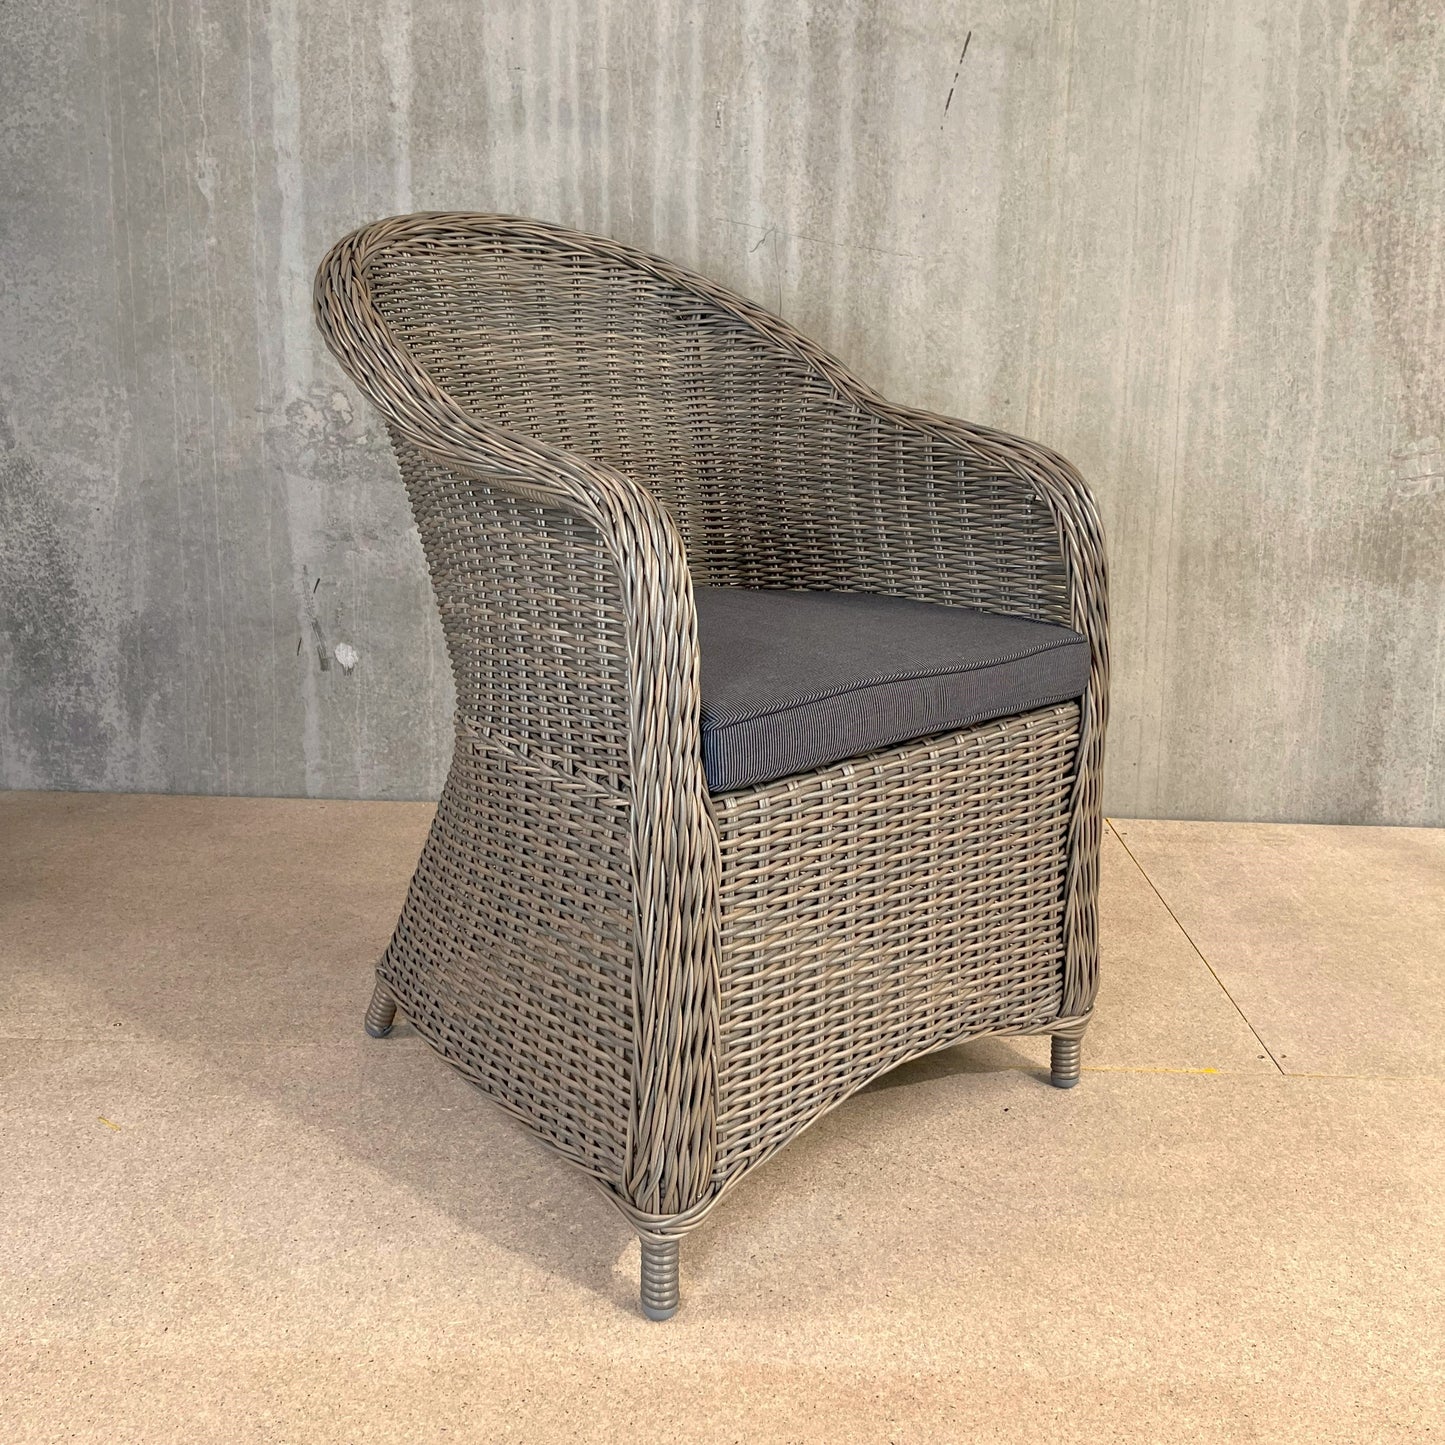 MALAWI 2-Piece Set Poly Rattan Wicker Outdoor Dining Chair - Brown Grey